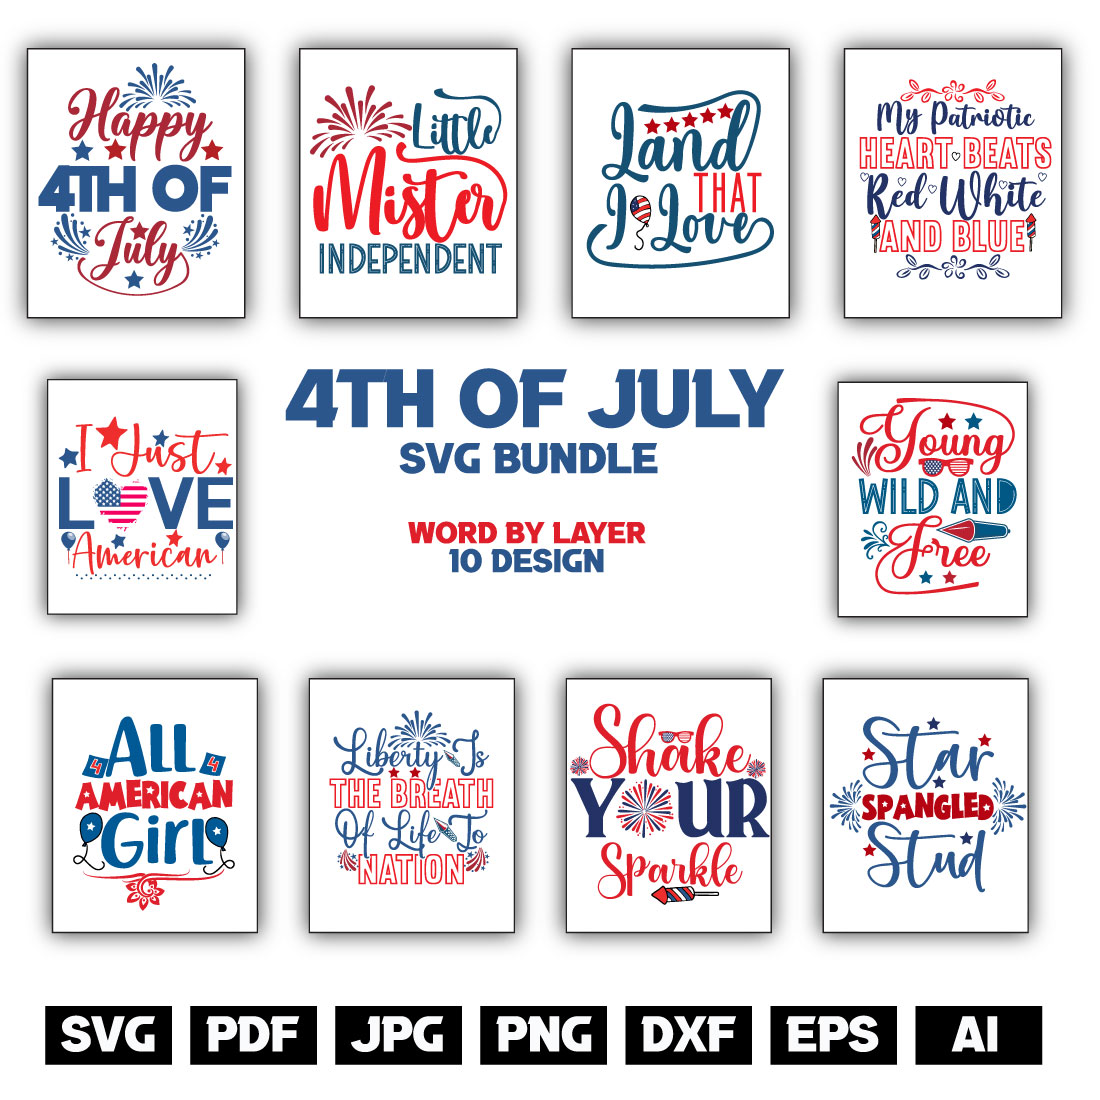 4th of july svg bundle preview image.